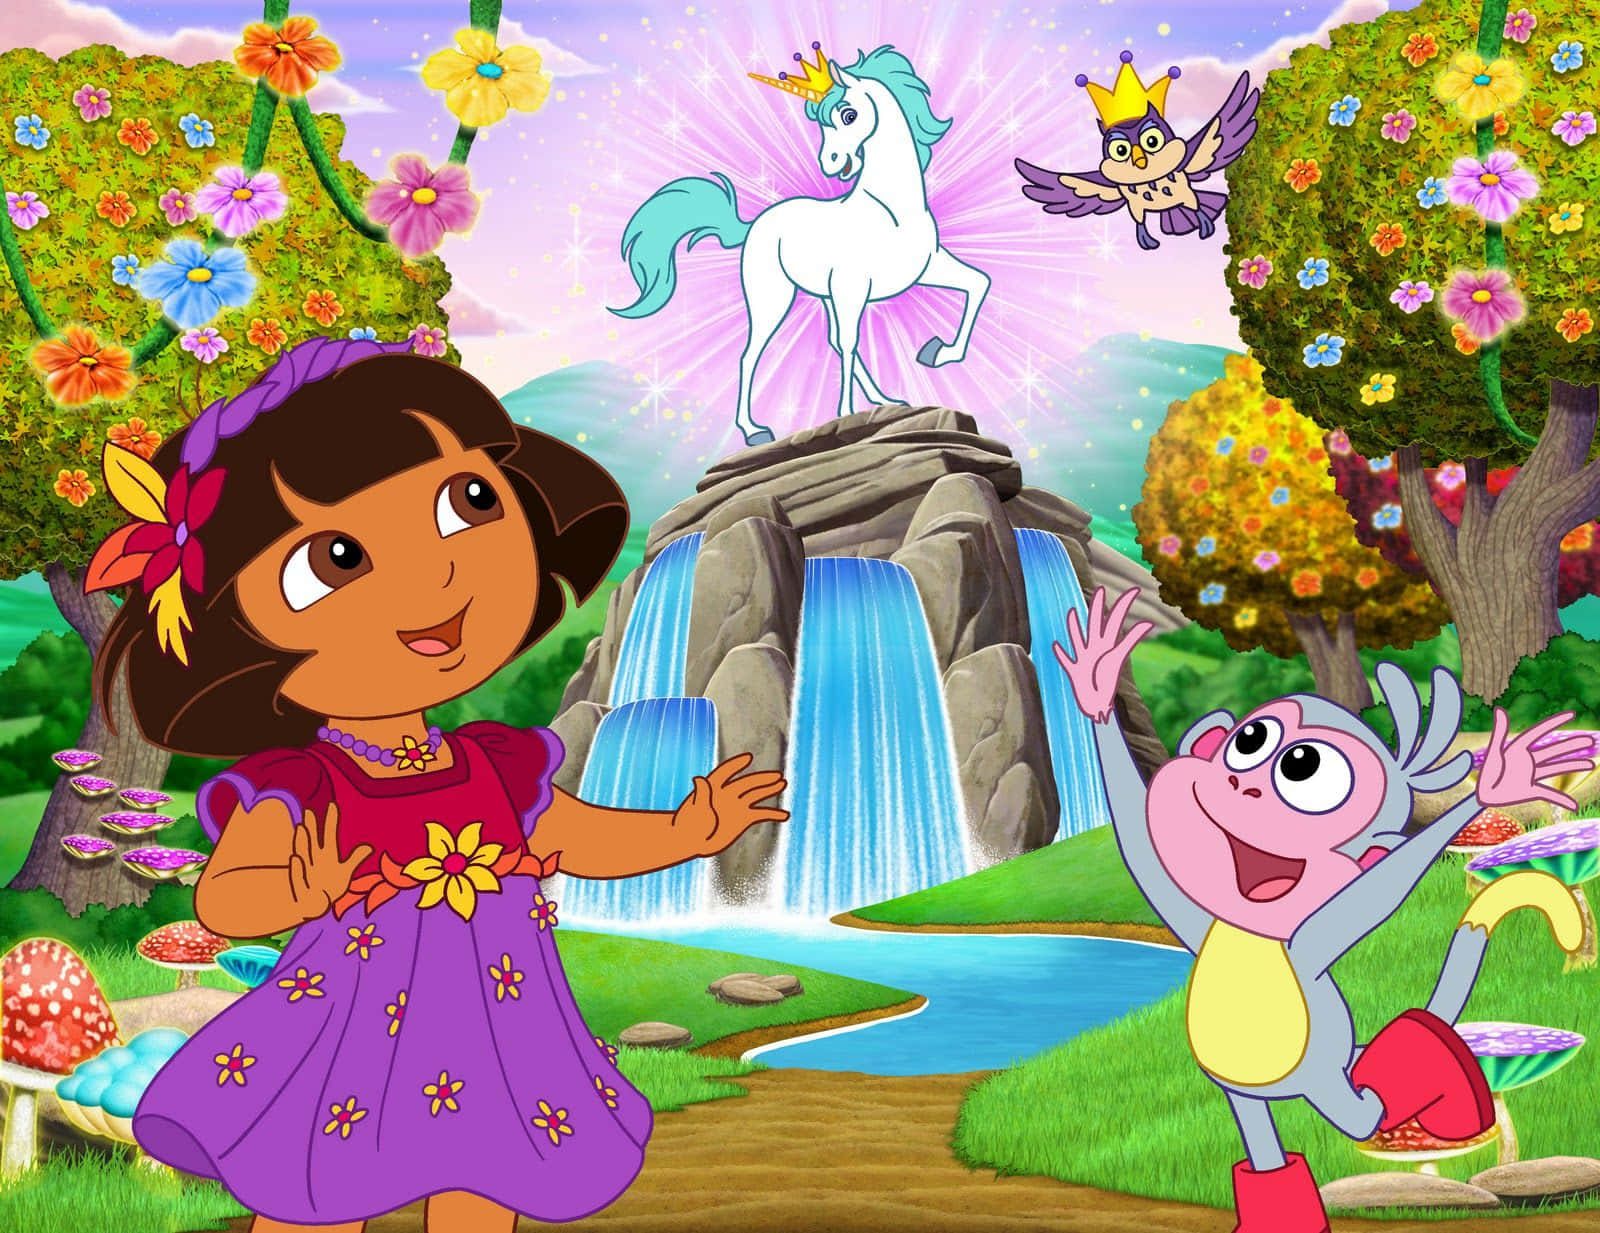 Welcome to a World of Fun and Adventure with Dora!